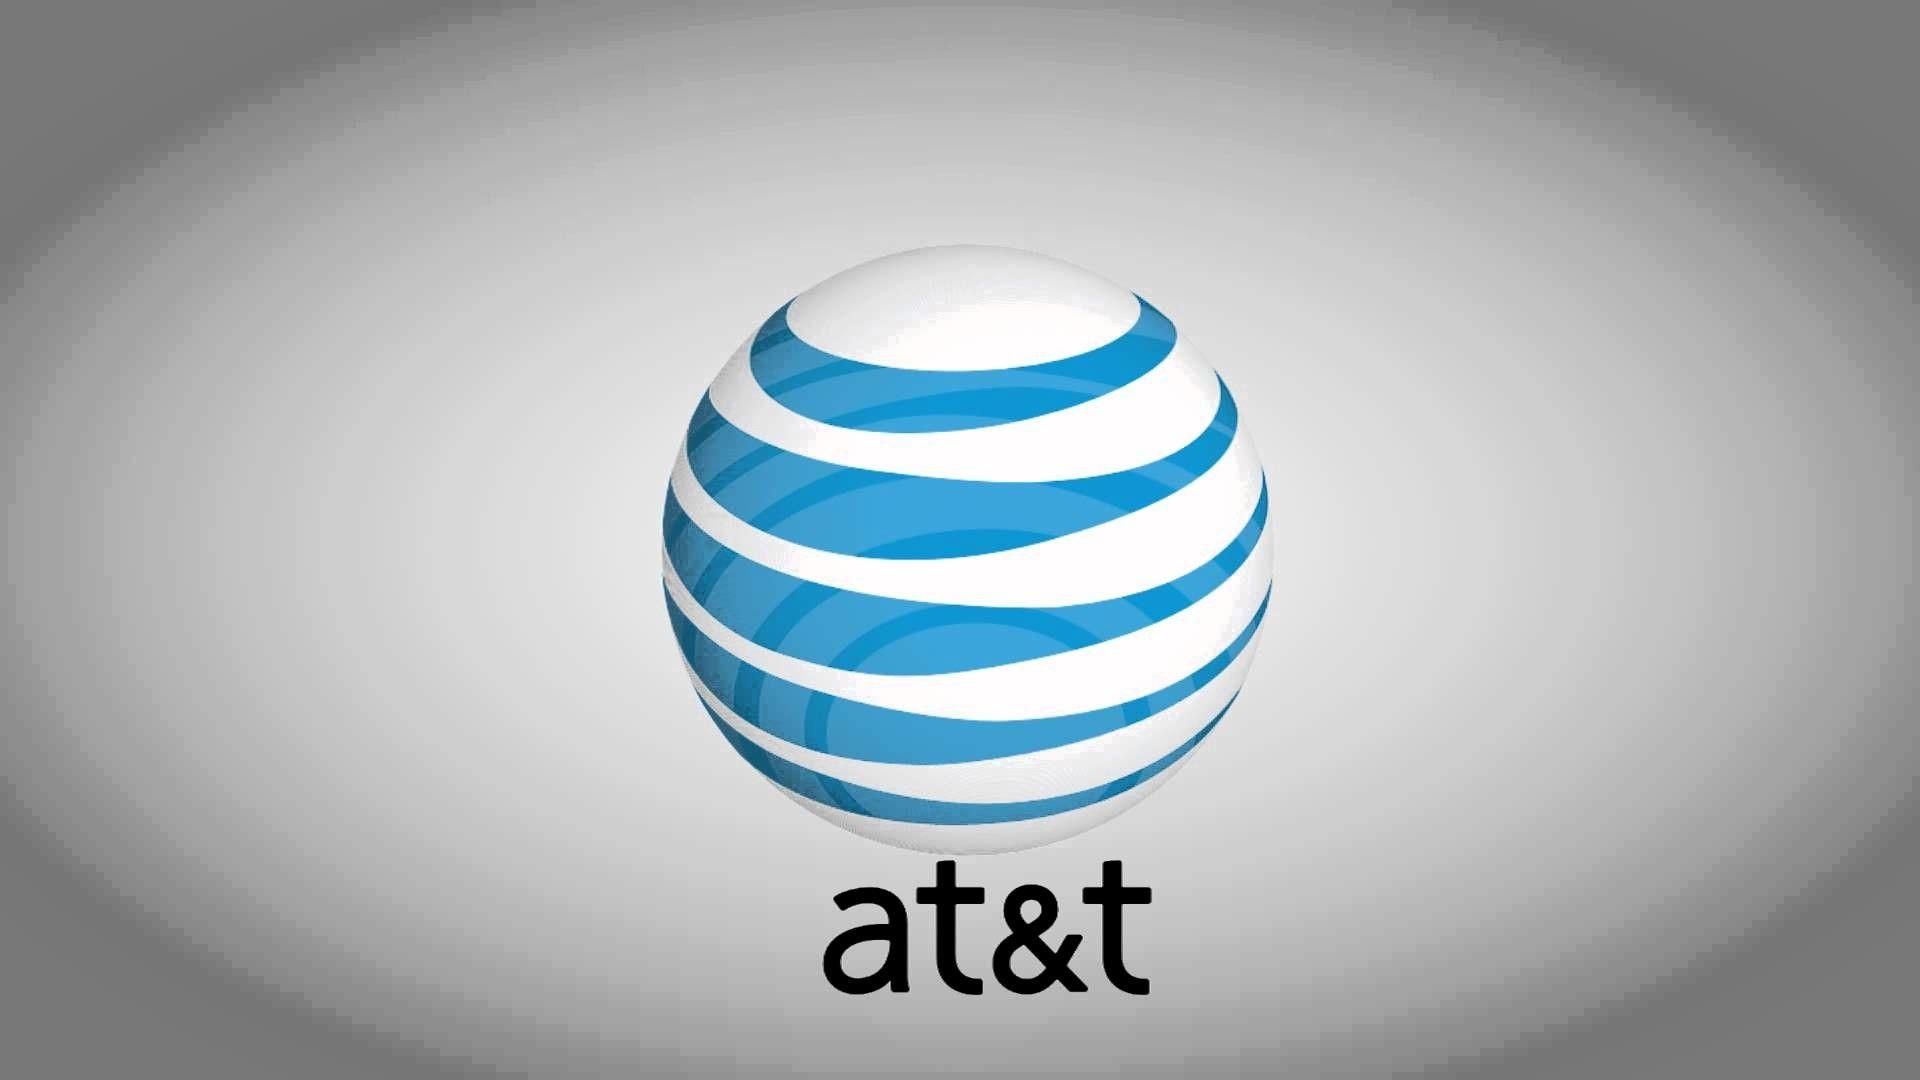 AT&T Wallpapers - Wallpaper Cave